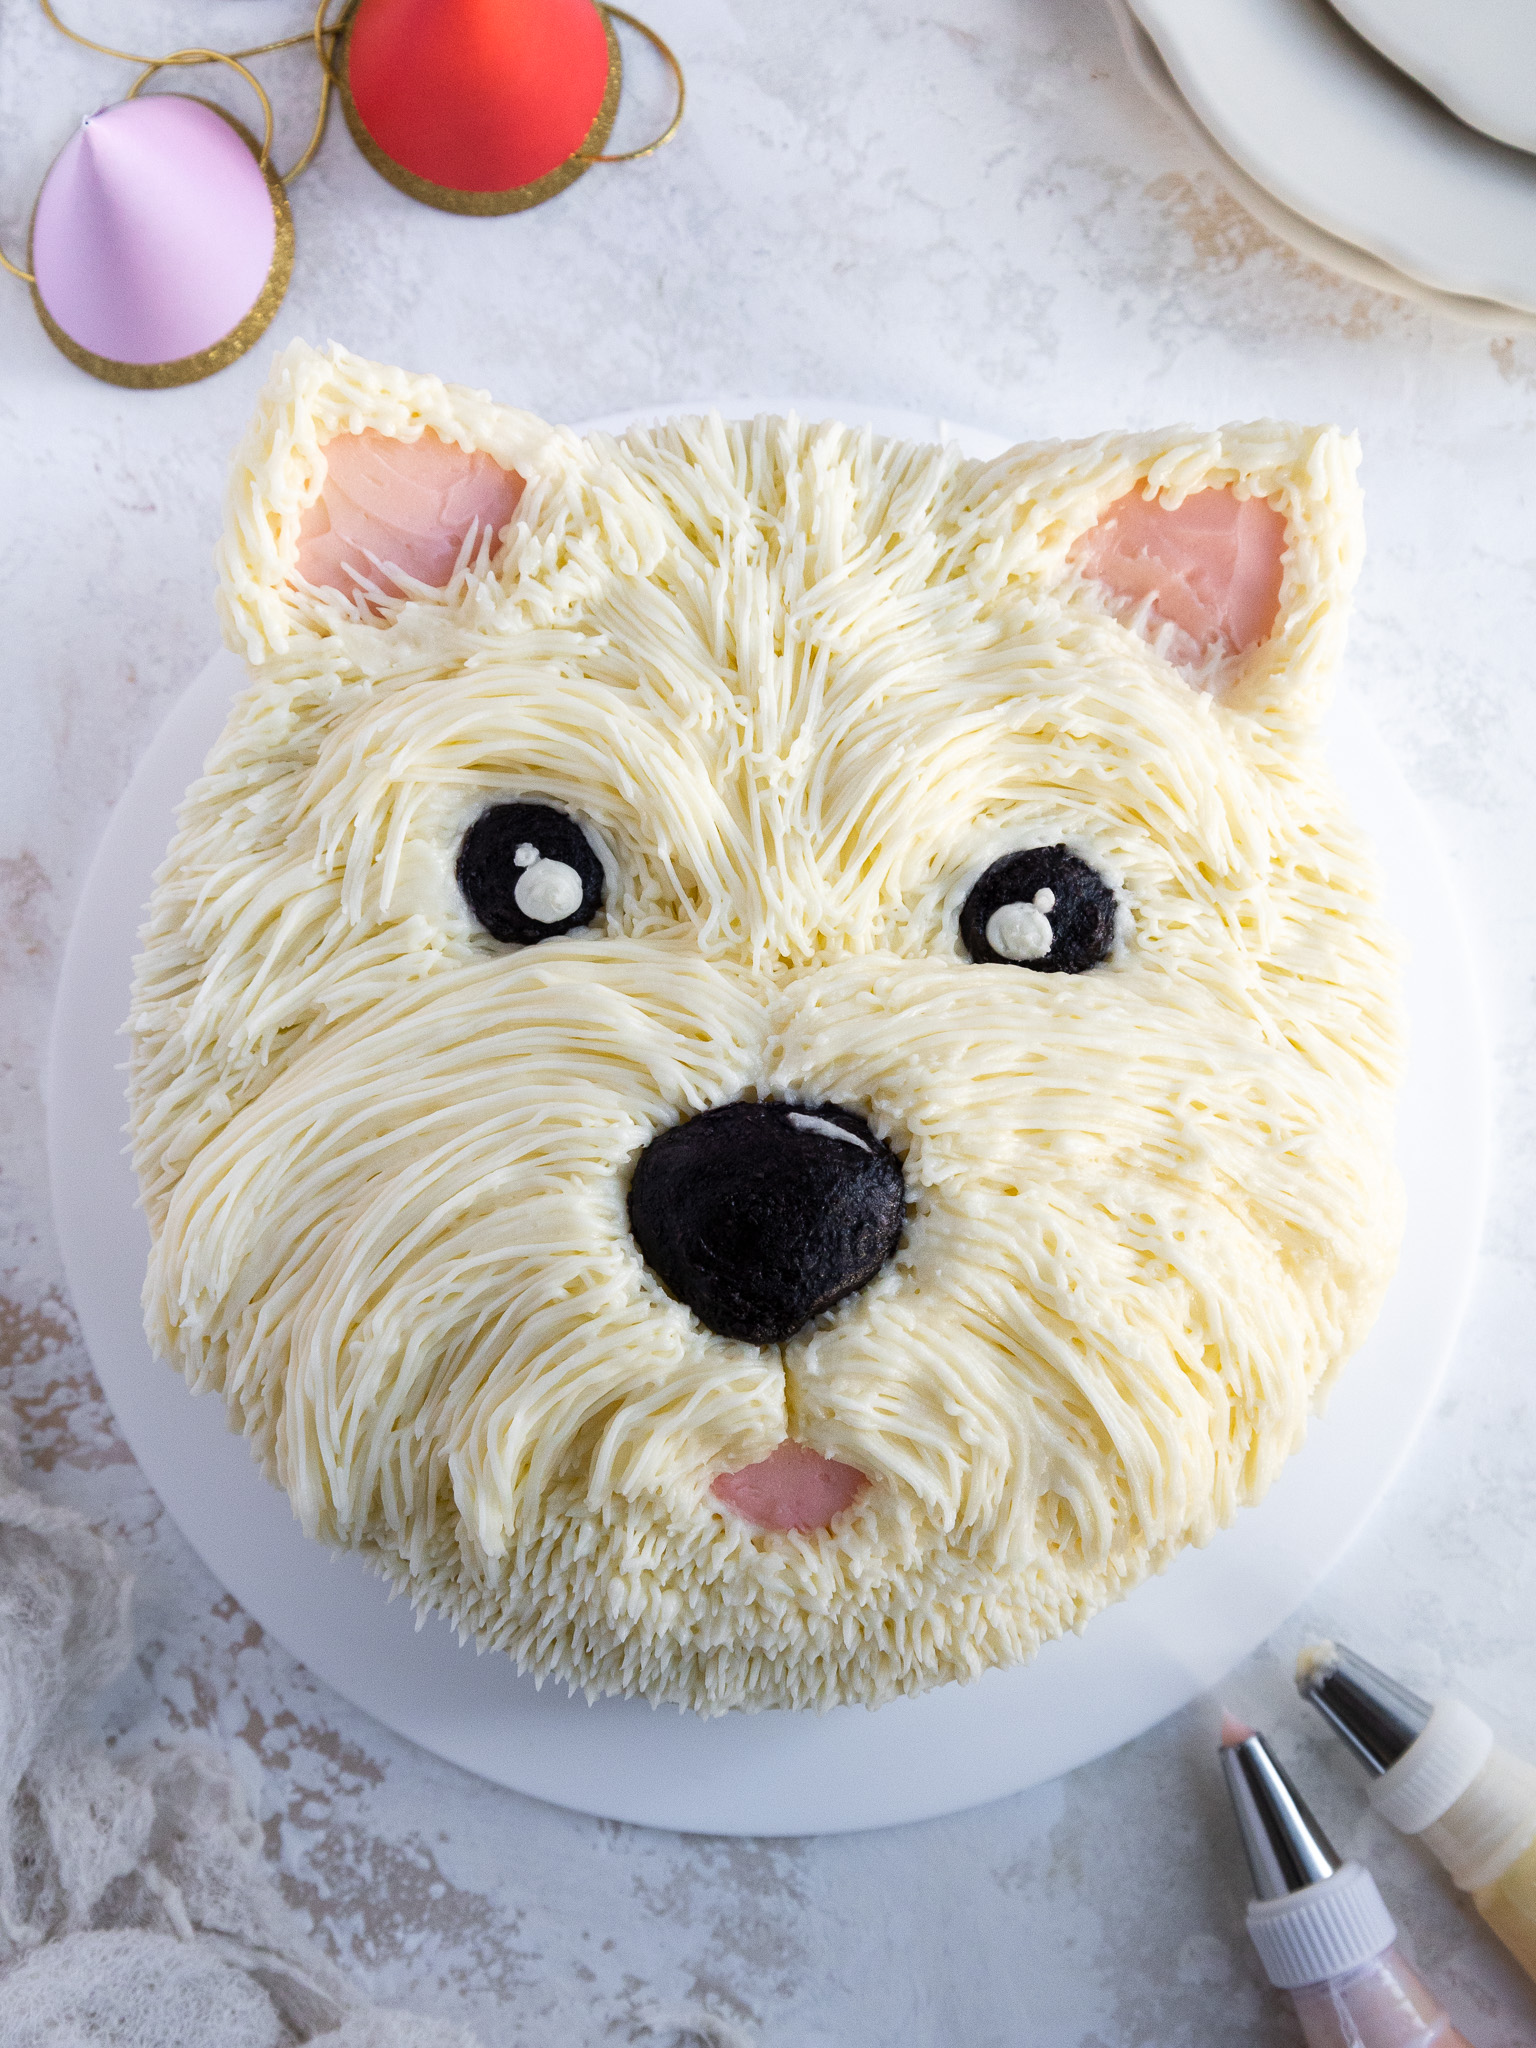 Animal Cake Series Archives - Chelsweets